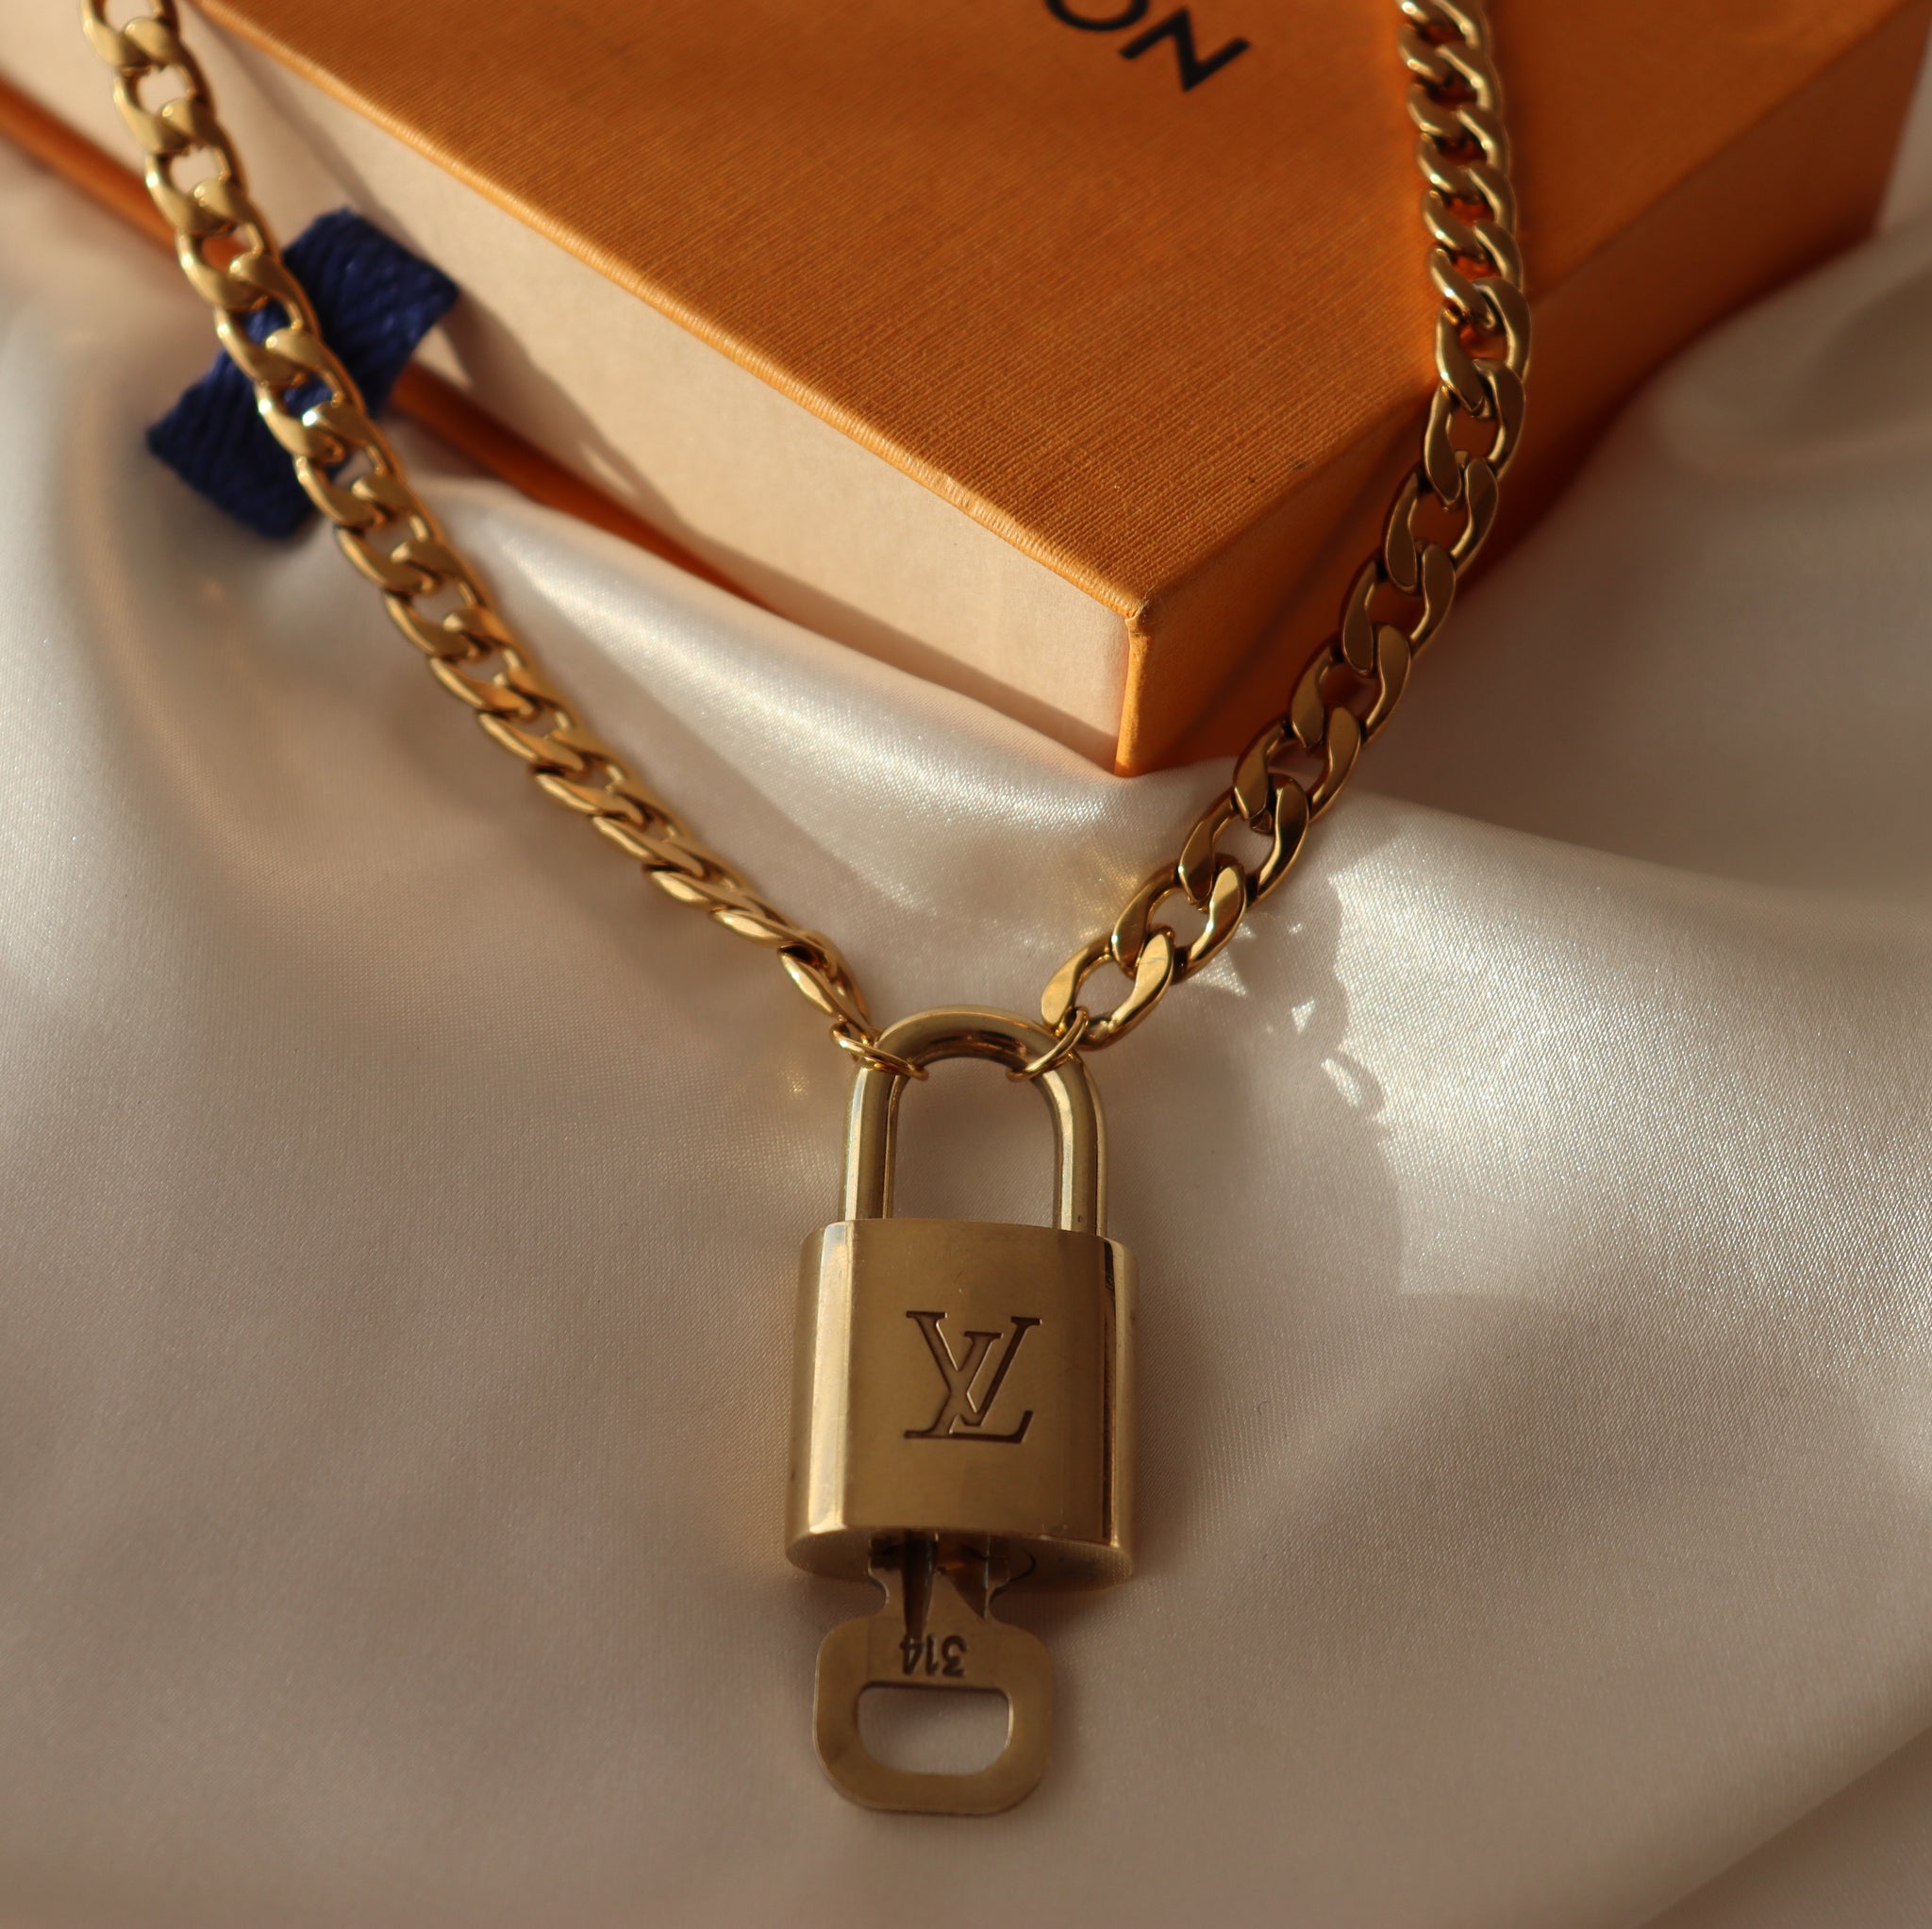 Lock With Key on Necklace Relic the Label